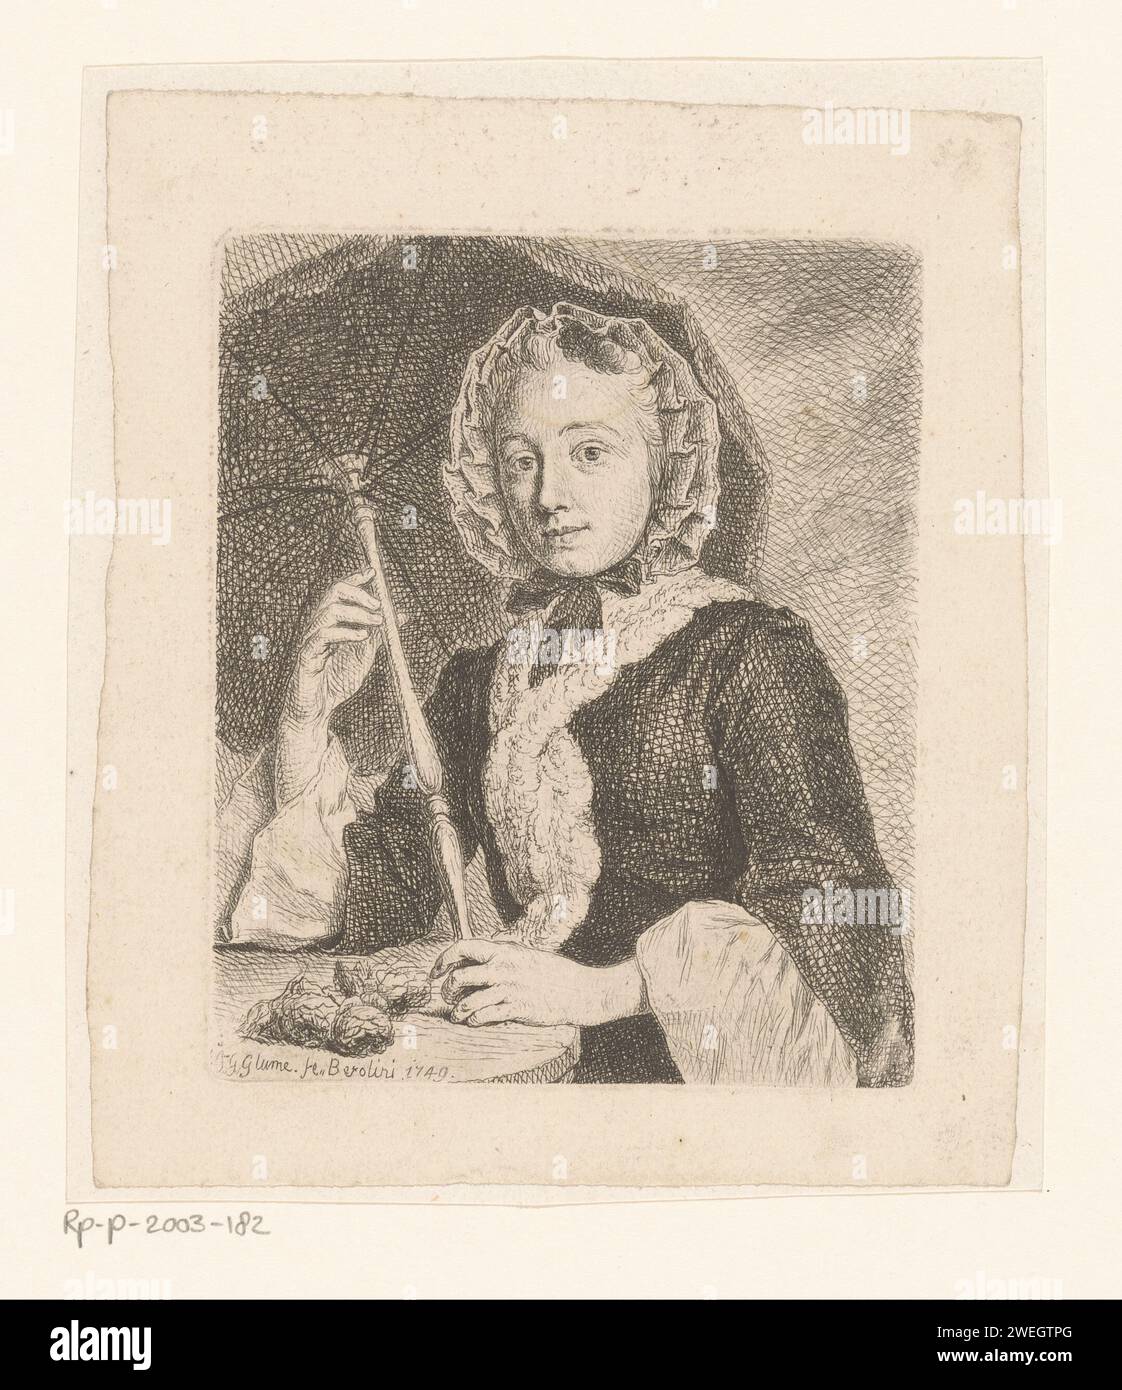 Woman with parasol, 1749 print Portrait of Charlotte Dorothea, born Copcovius (1724-1776), as a young woman with a hat on the head, parasol in hand, standing at a round table. She was the wife of Friedrich Christian Glume, the brother of the artist. After his death in 1753, a few years after the print appeared, she remarried with his other brother Carl Philipp.  paper etching umbrella Stock Photo